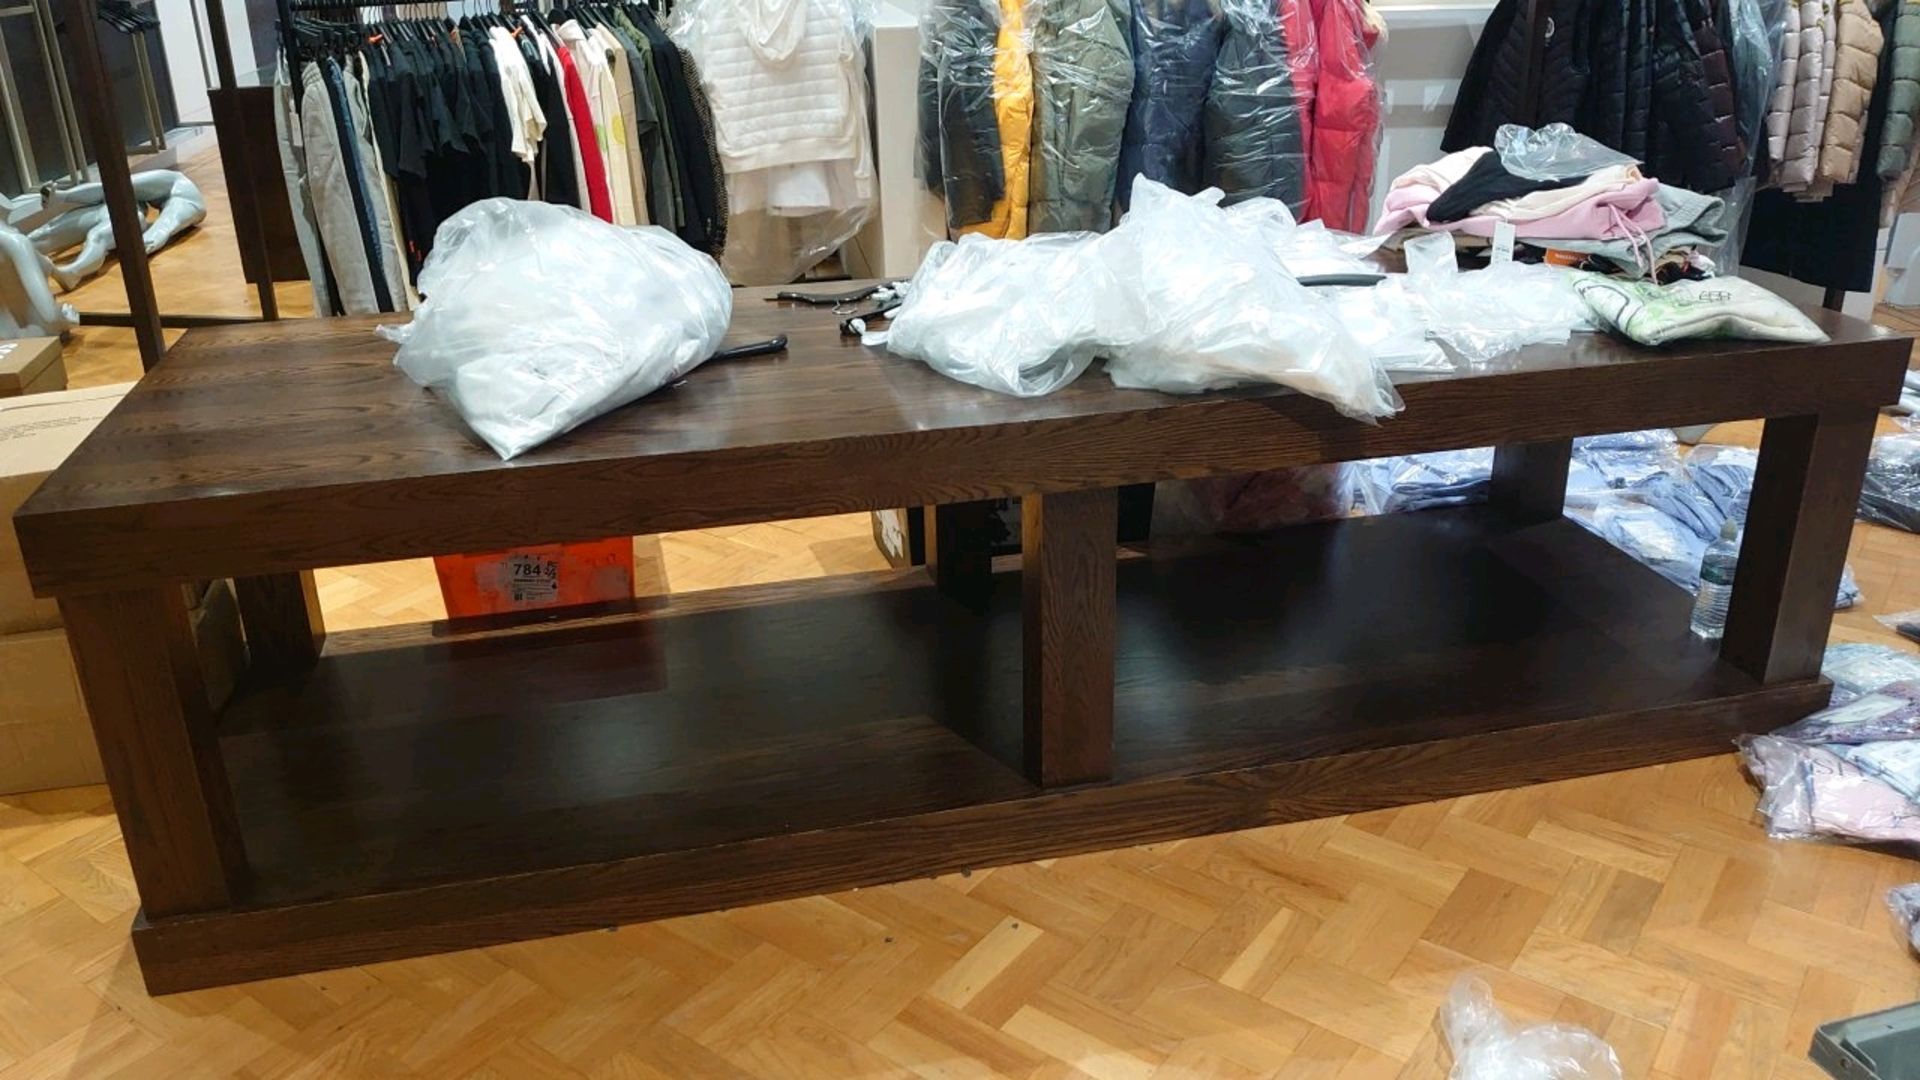 Large Clothes Display Table